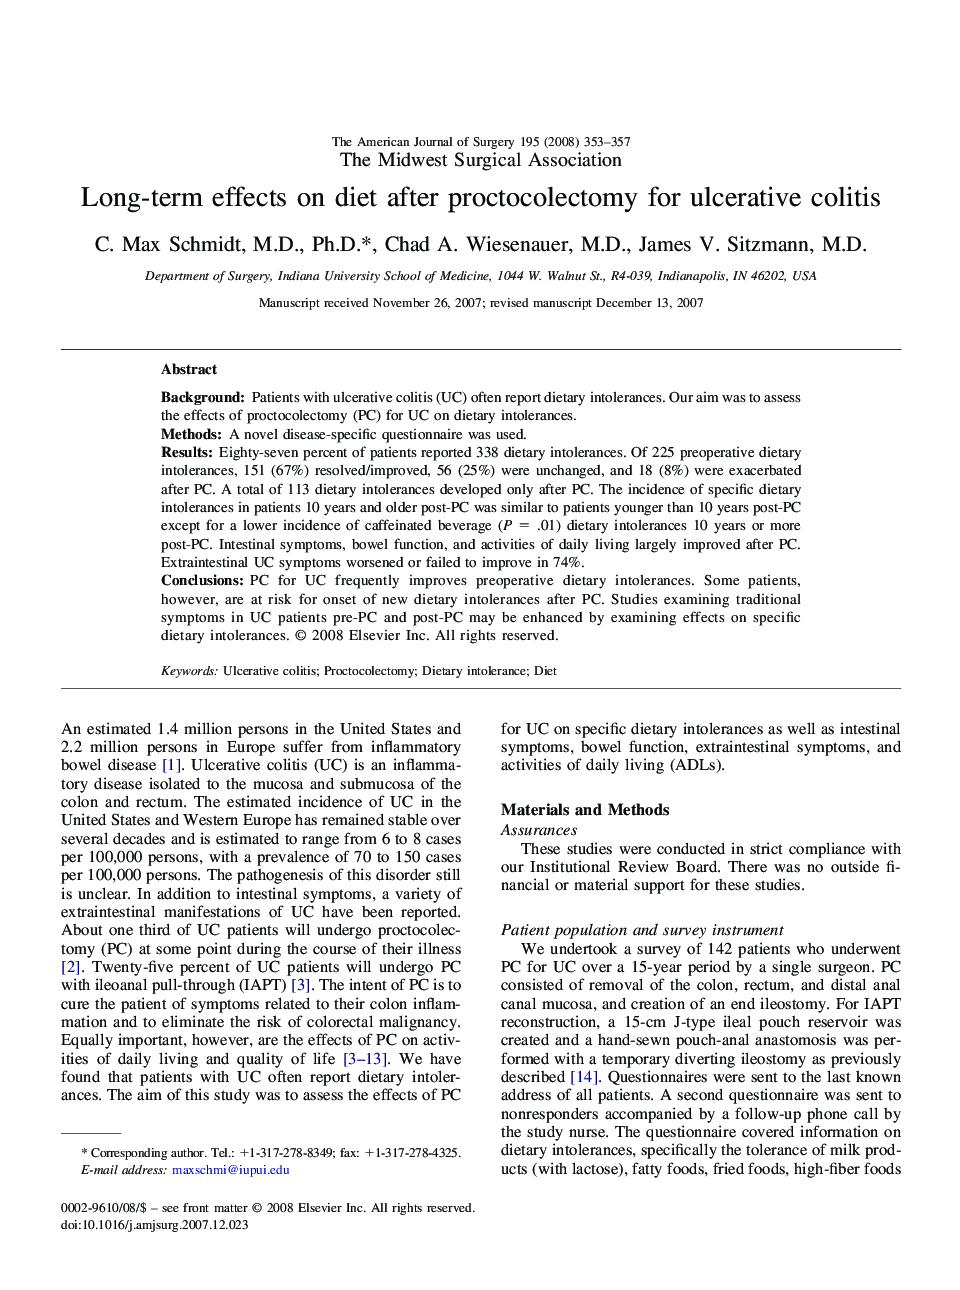 Long-term effects on diet after proctocolectomy for ulcerative colitis